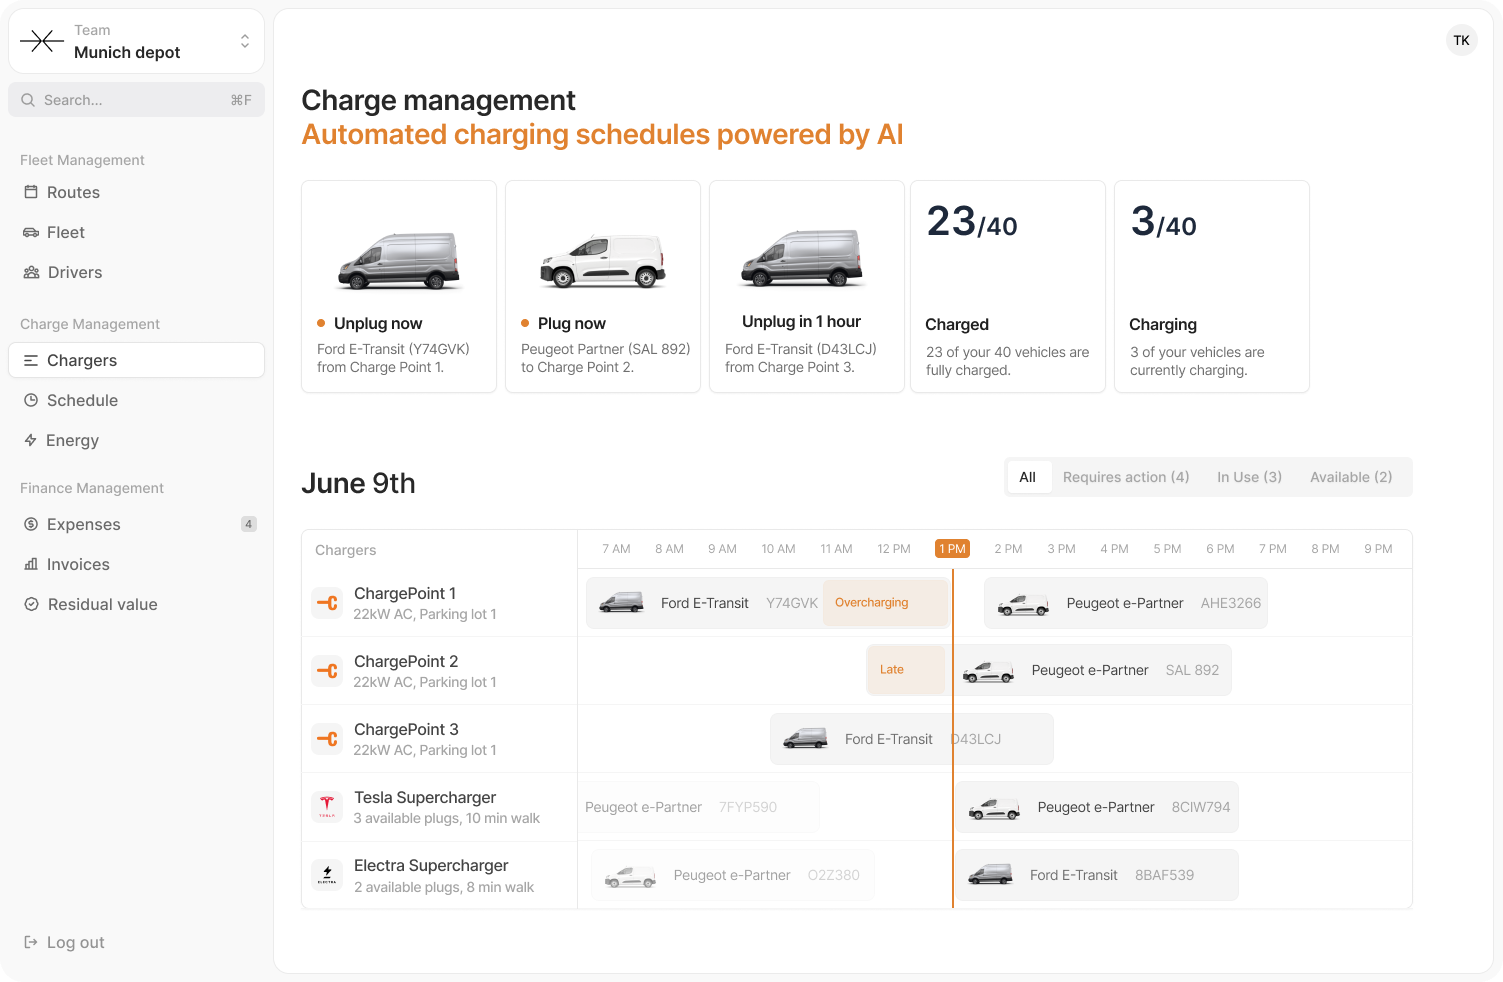 2. Charge management page